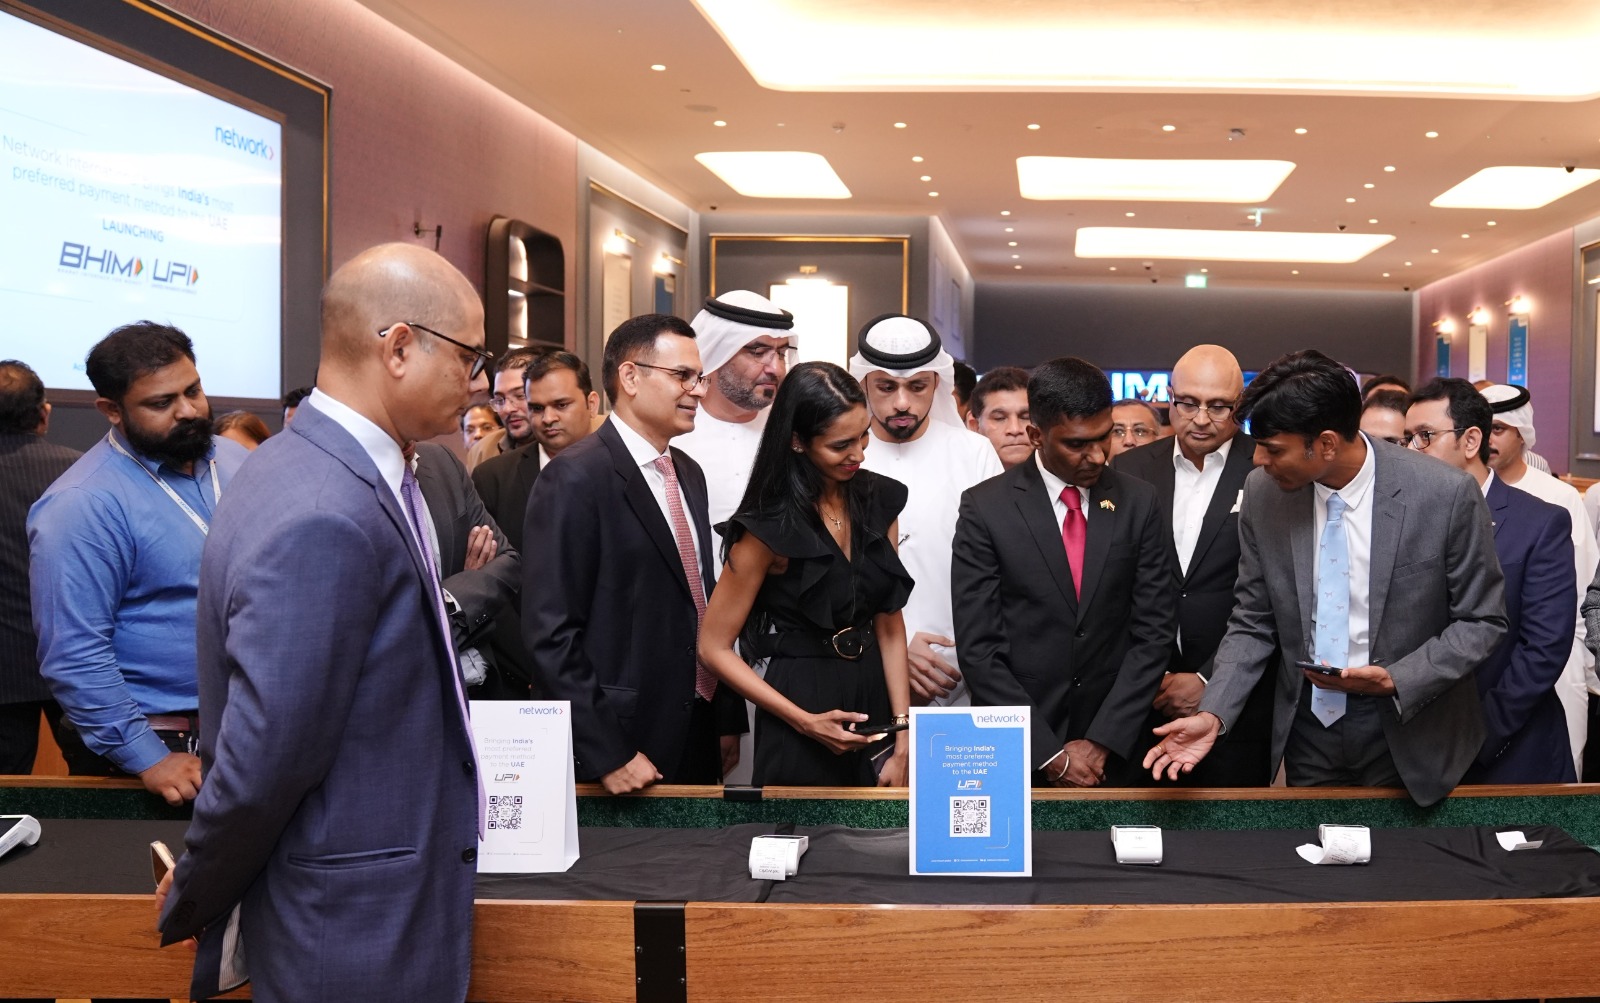 NPCI International partners with Network International to enable UPI QR payment acceptance across its merchants in the UAE